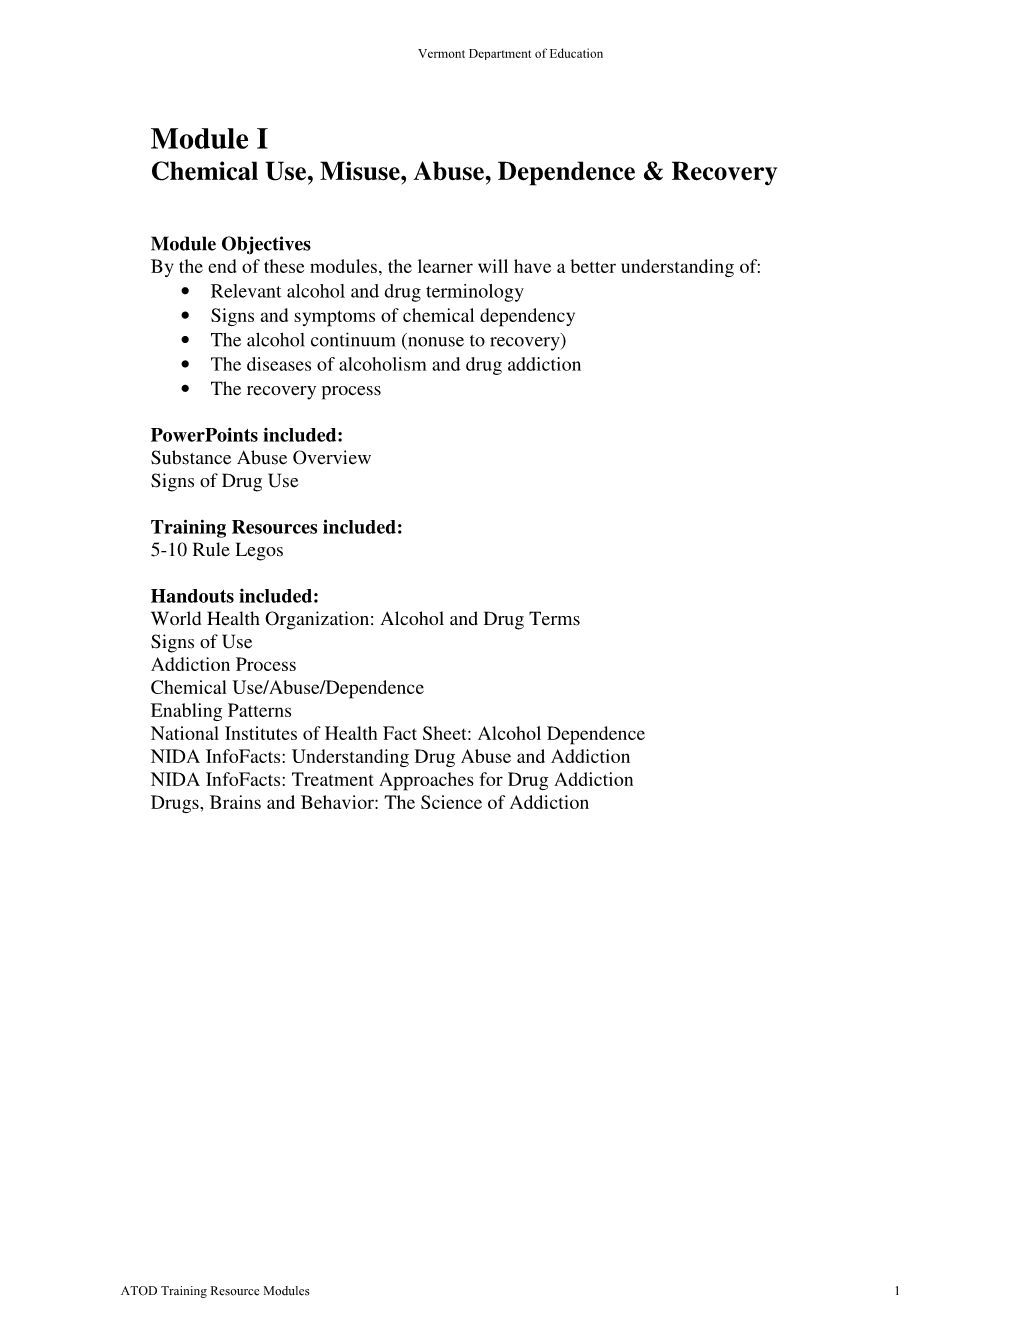 Module I Chemical Use, Misuse, Abuse, Dependence & Recovery